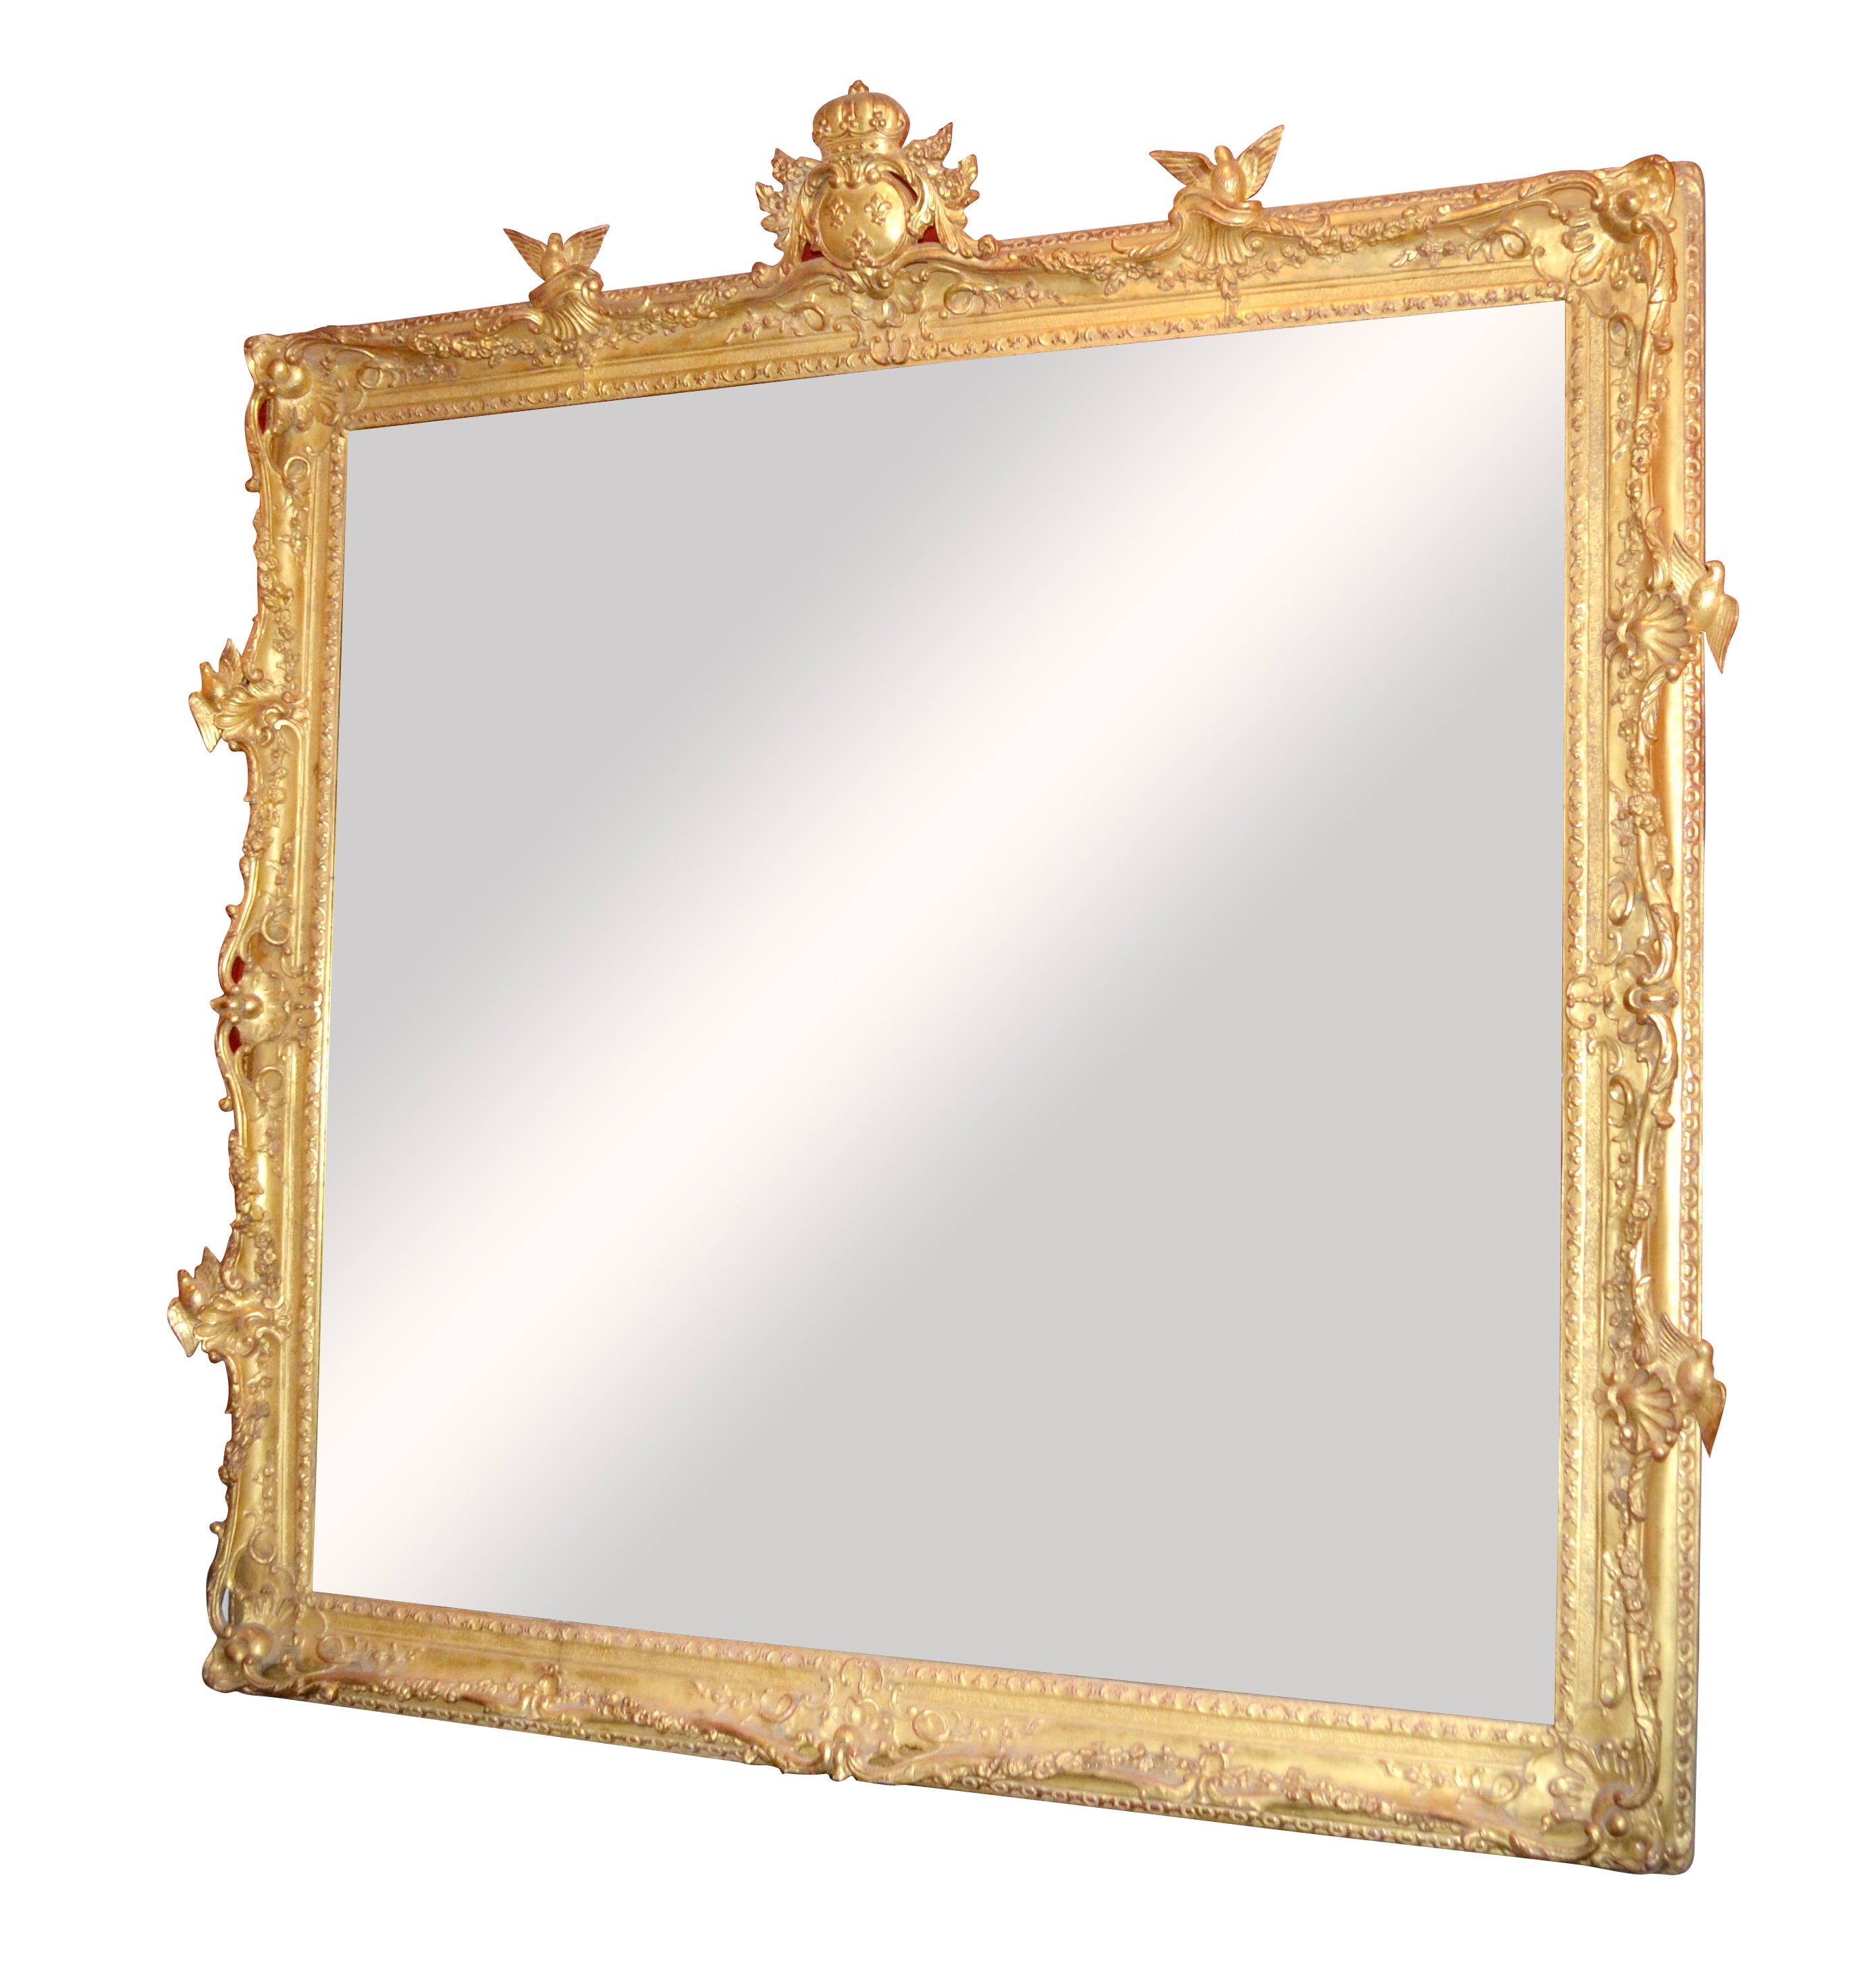 A large, beautifully carved and gilded mirror frame in the Louis XV style; open carving to the sides and corners with two carved birds on each of the four sides, the top further decorated with a central cartouche showing three fleur-de-lys, the